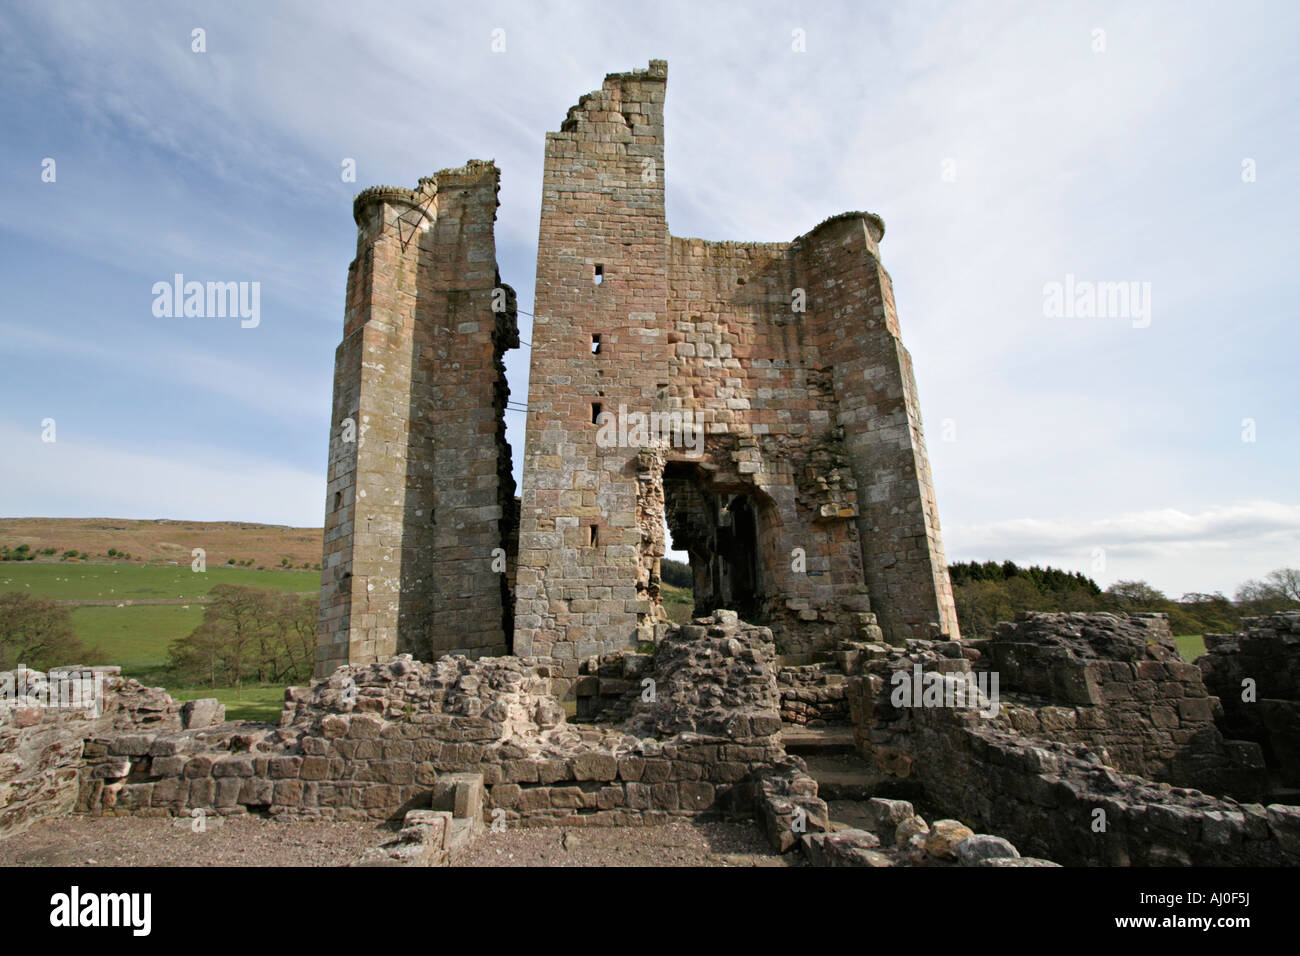 south west of Alnwick stands the ruins of Edlingham Castle maintained ...